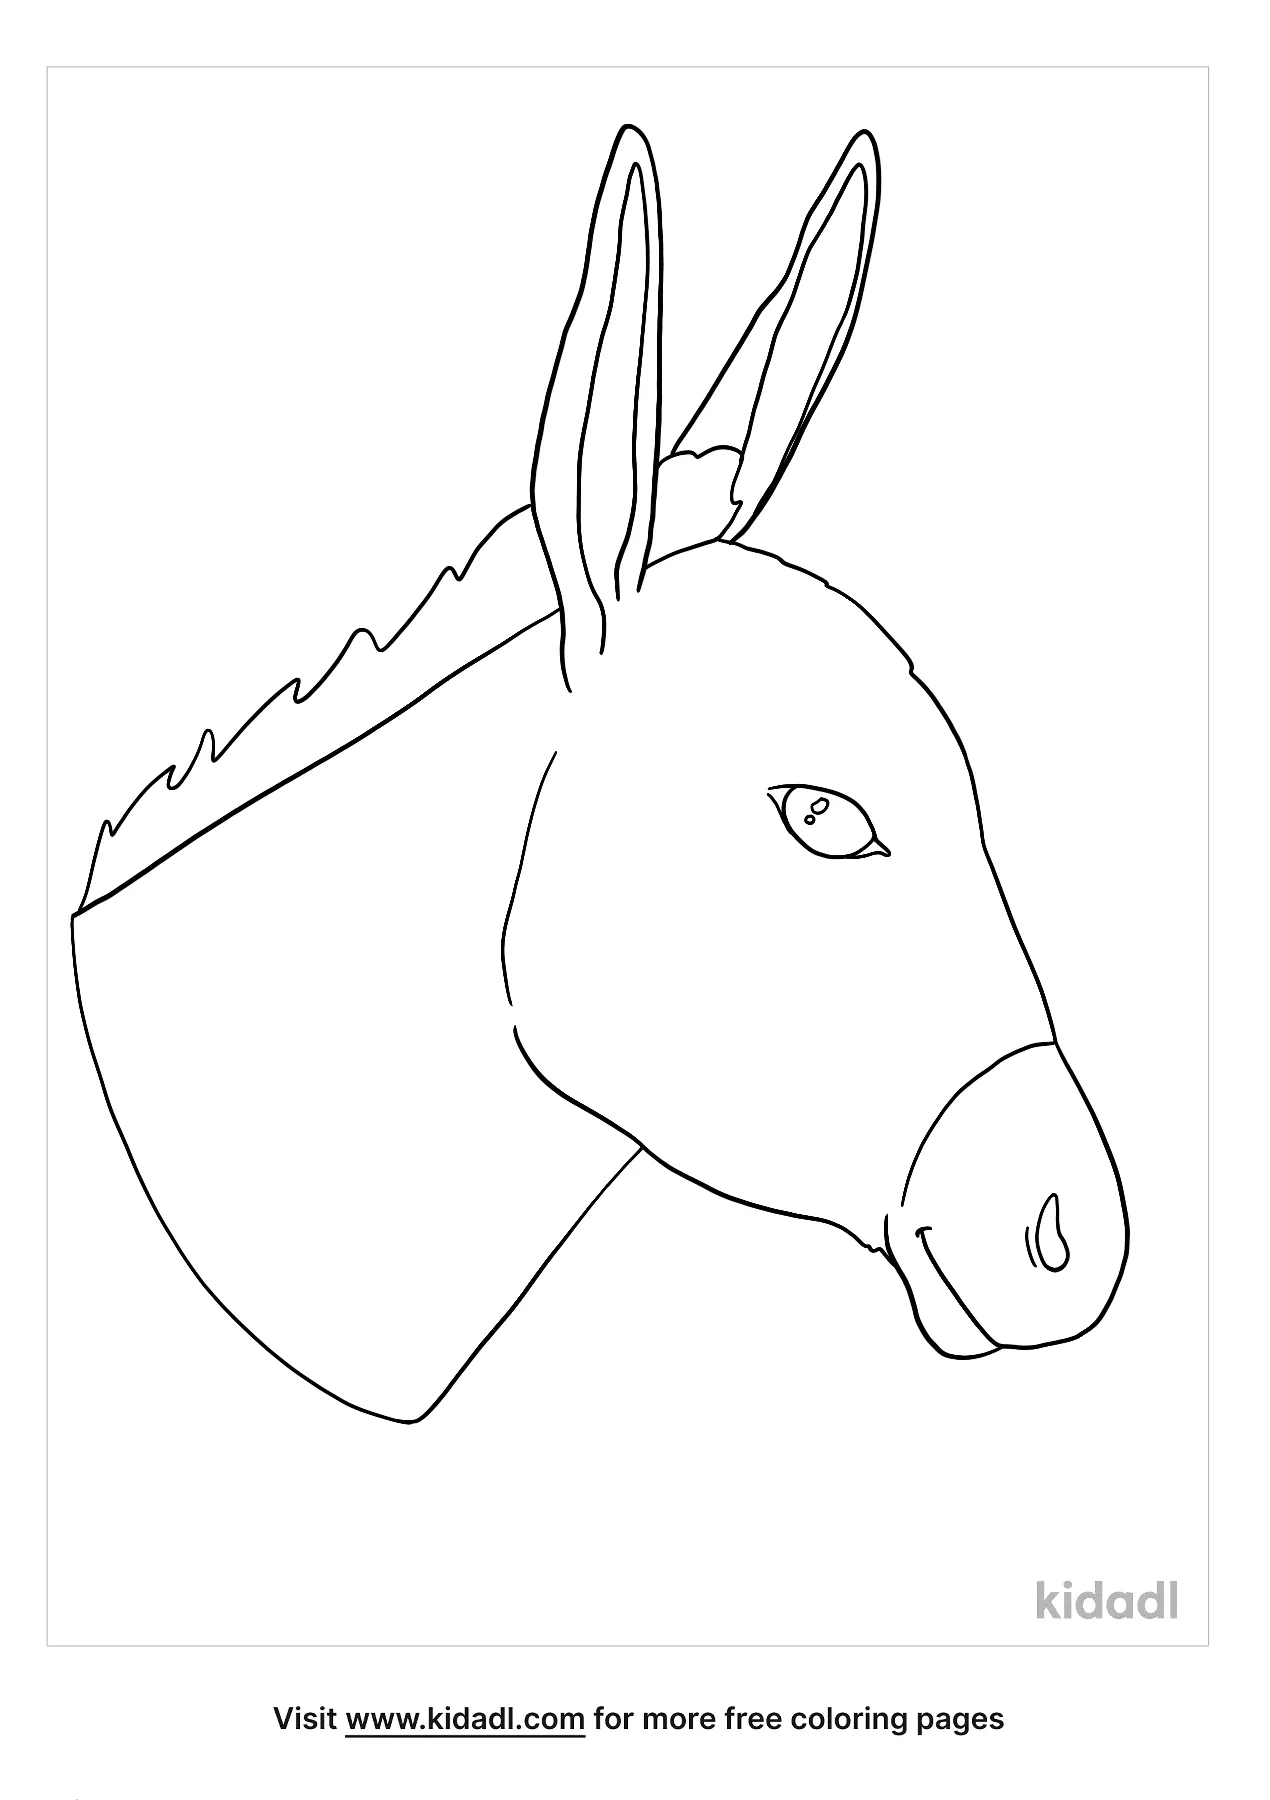 Donkey Head Coloring Page   Free Mammals Coloring Page   Kidadl